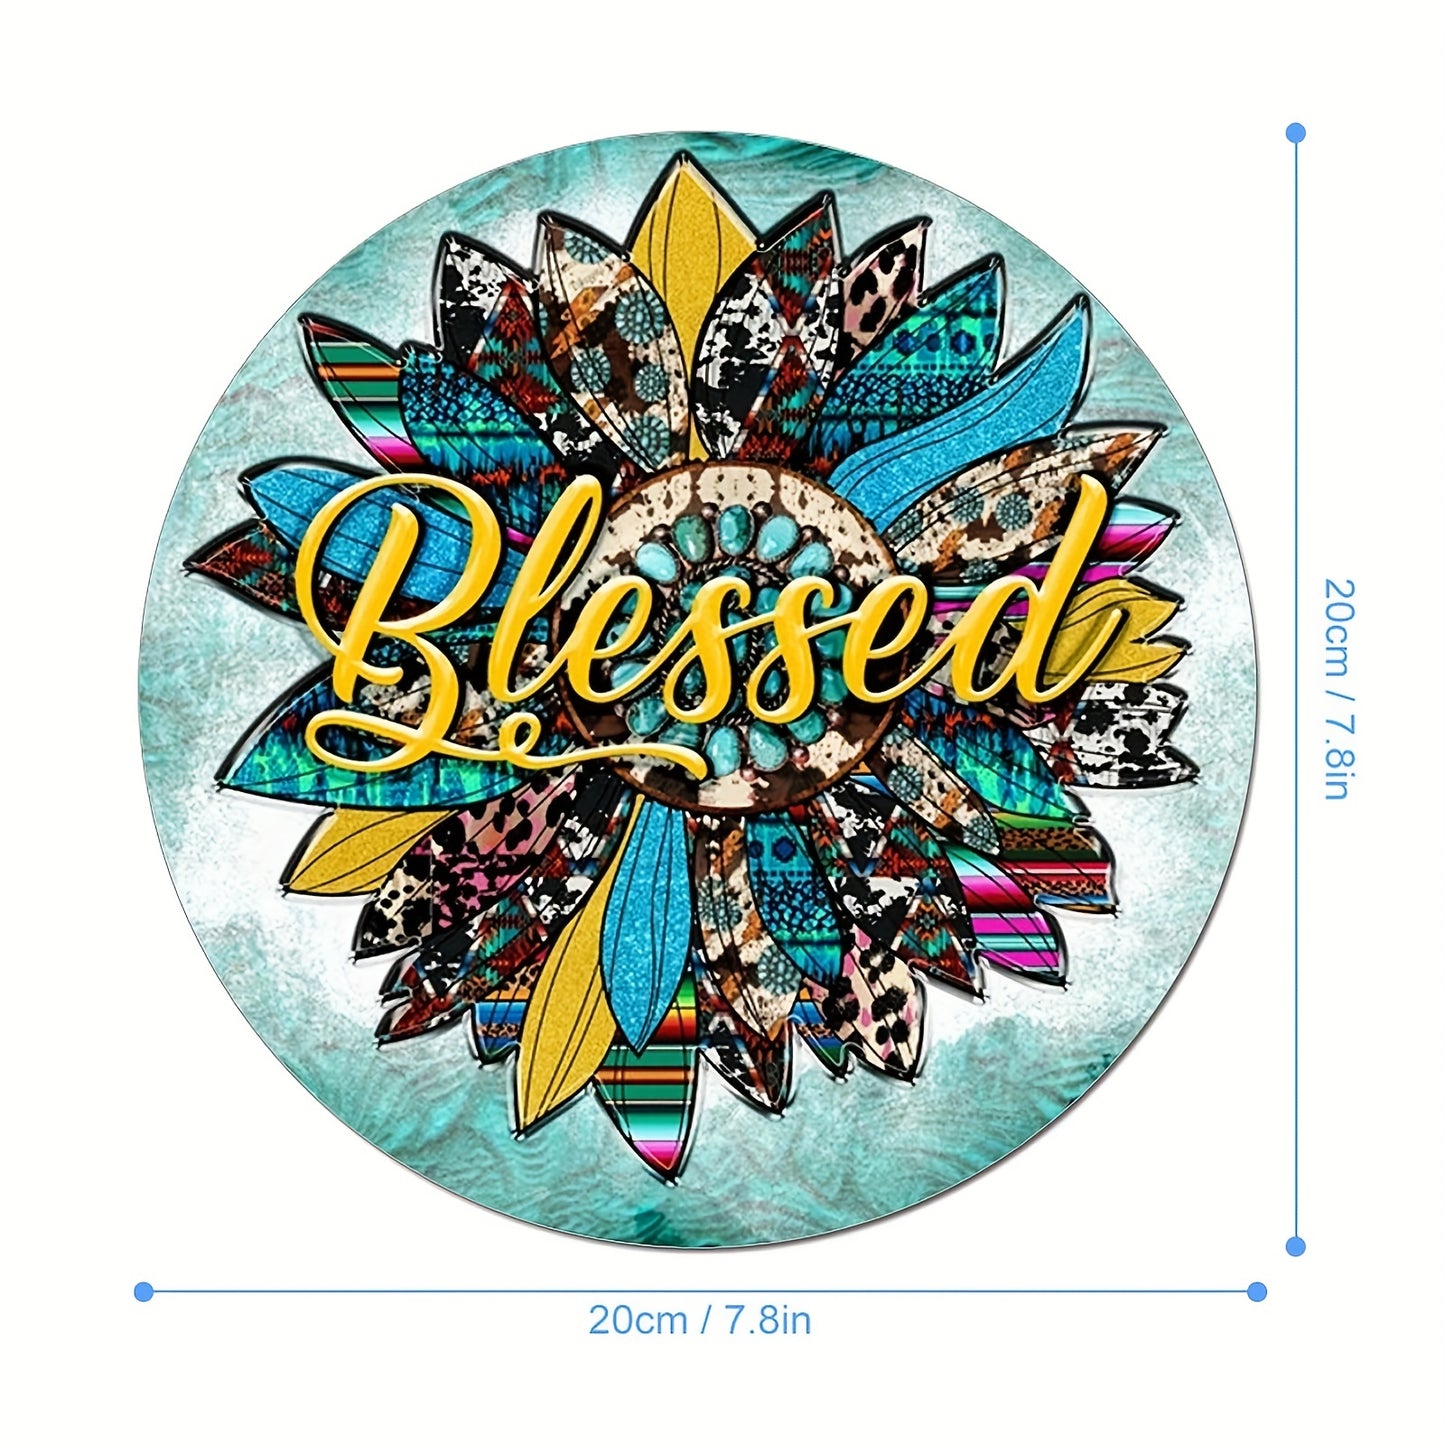 Blessed Christian Computer Mouse Pad  7.8*7.8*0.12inch/ 19.81*19.81*0.3cm claimedbygoddesigns